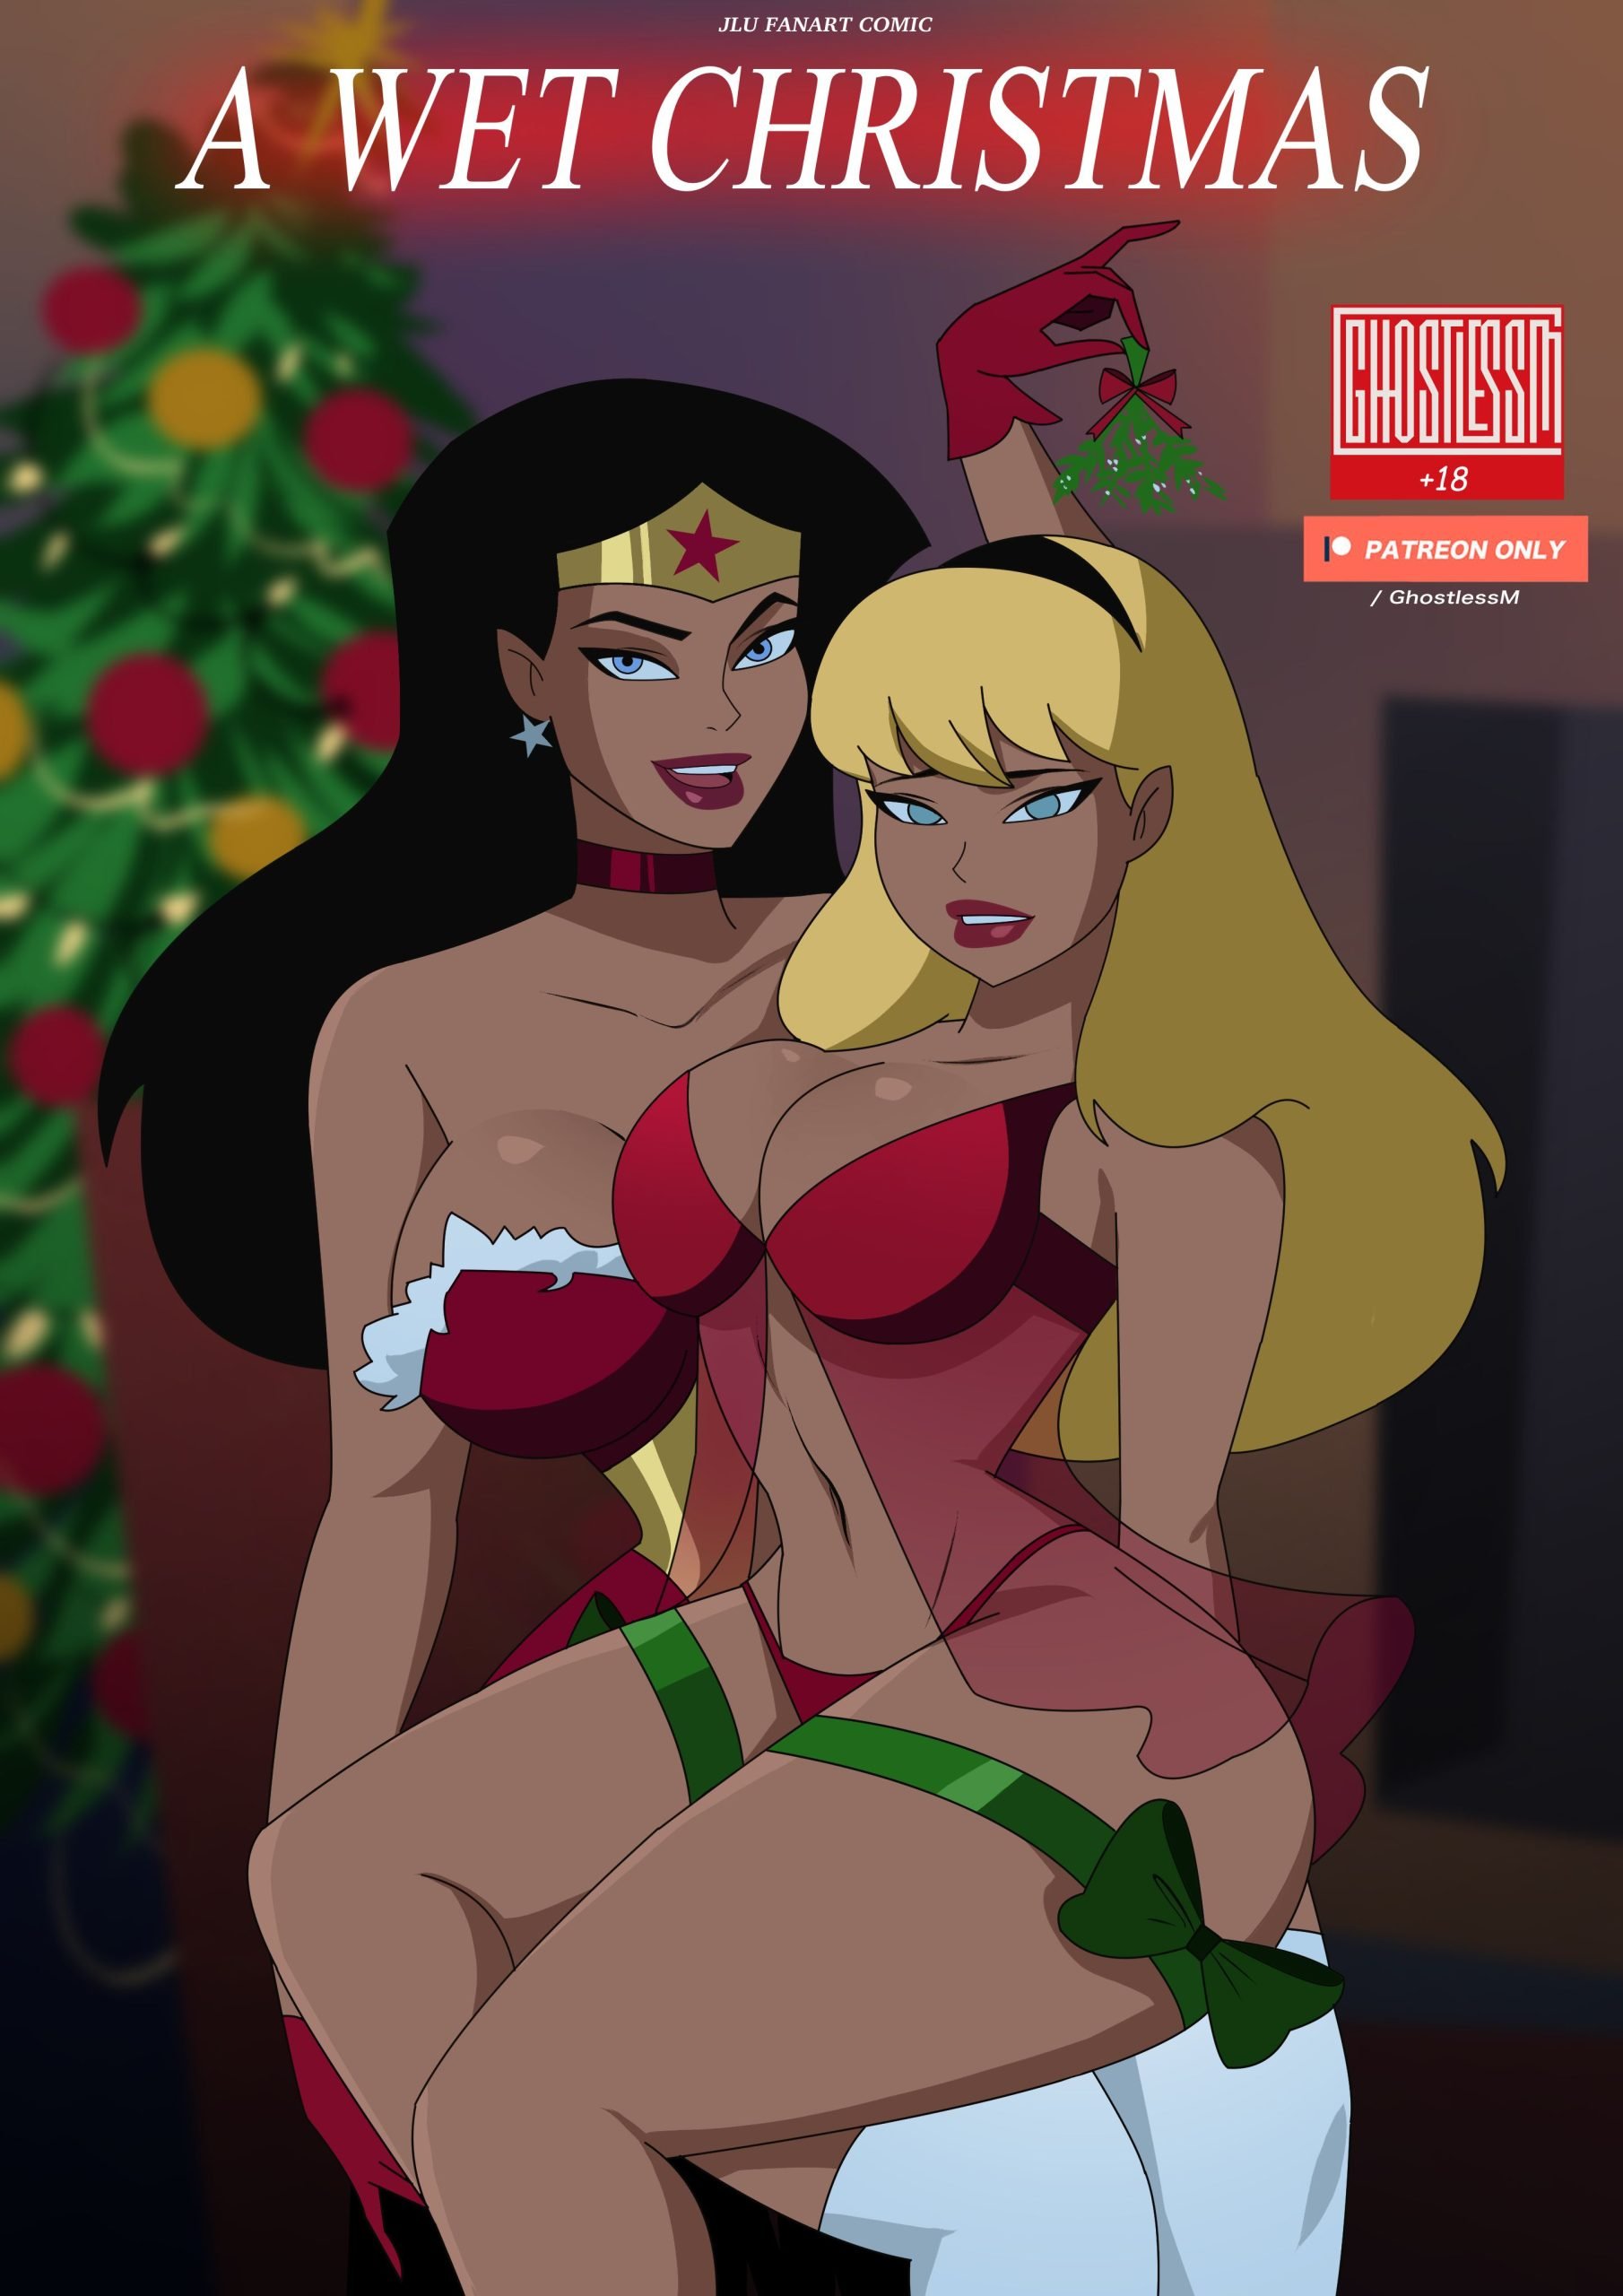 A Wet Christmas (Justice League) GhostlessM Porn Comic photo